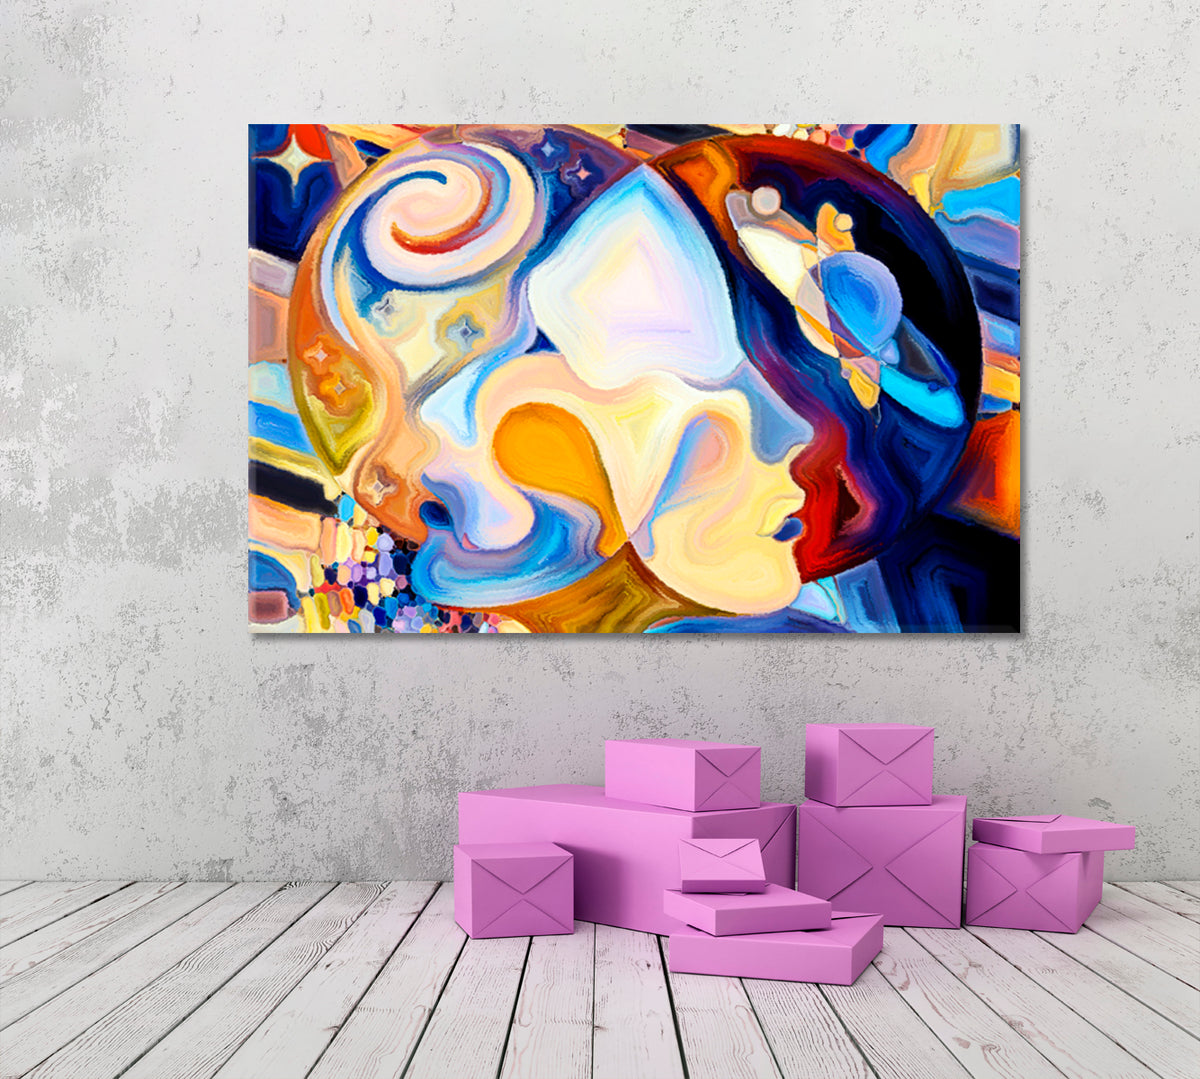 MALE AND FEMALE Abstract Multicolor Shapes Consciousness Art Artesty 1 panel 24" x 16" 